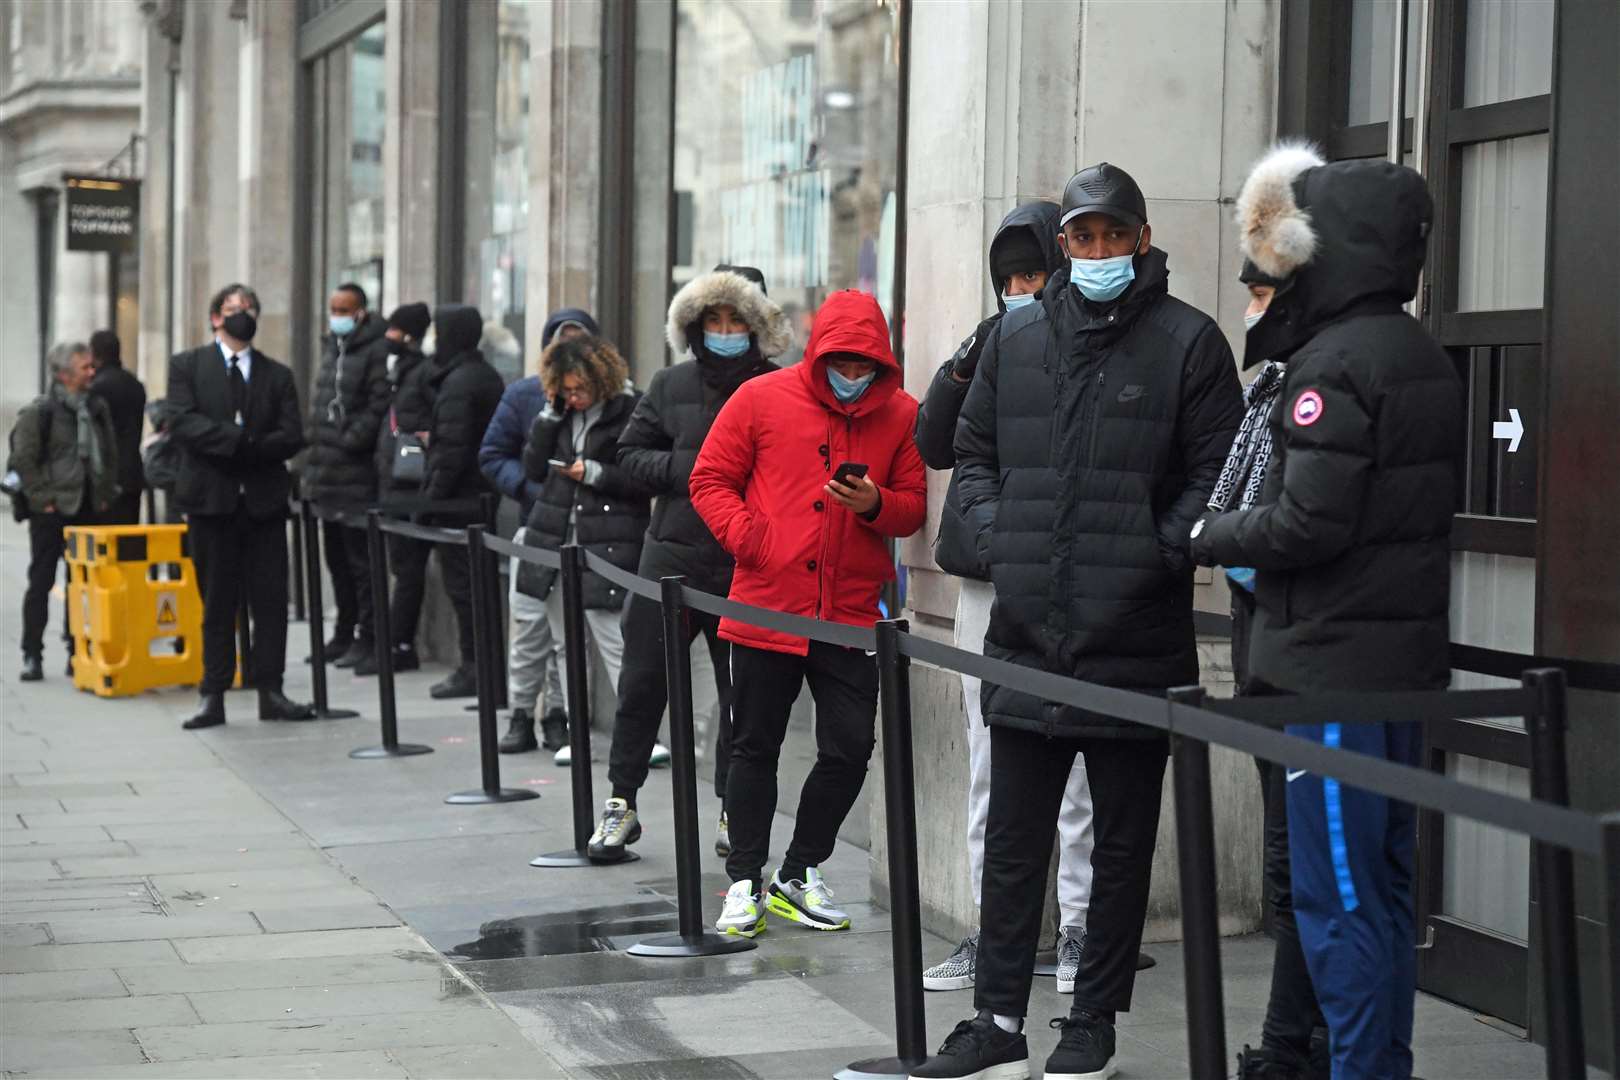 Shoppers outside the Nike Town store at Oxford Circus, London (Kirsty O’Connor/PA)